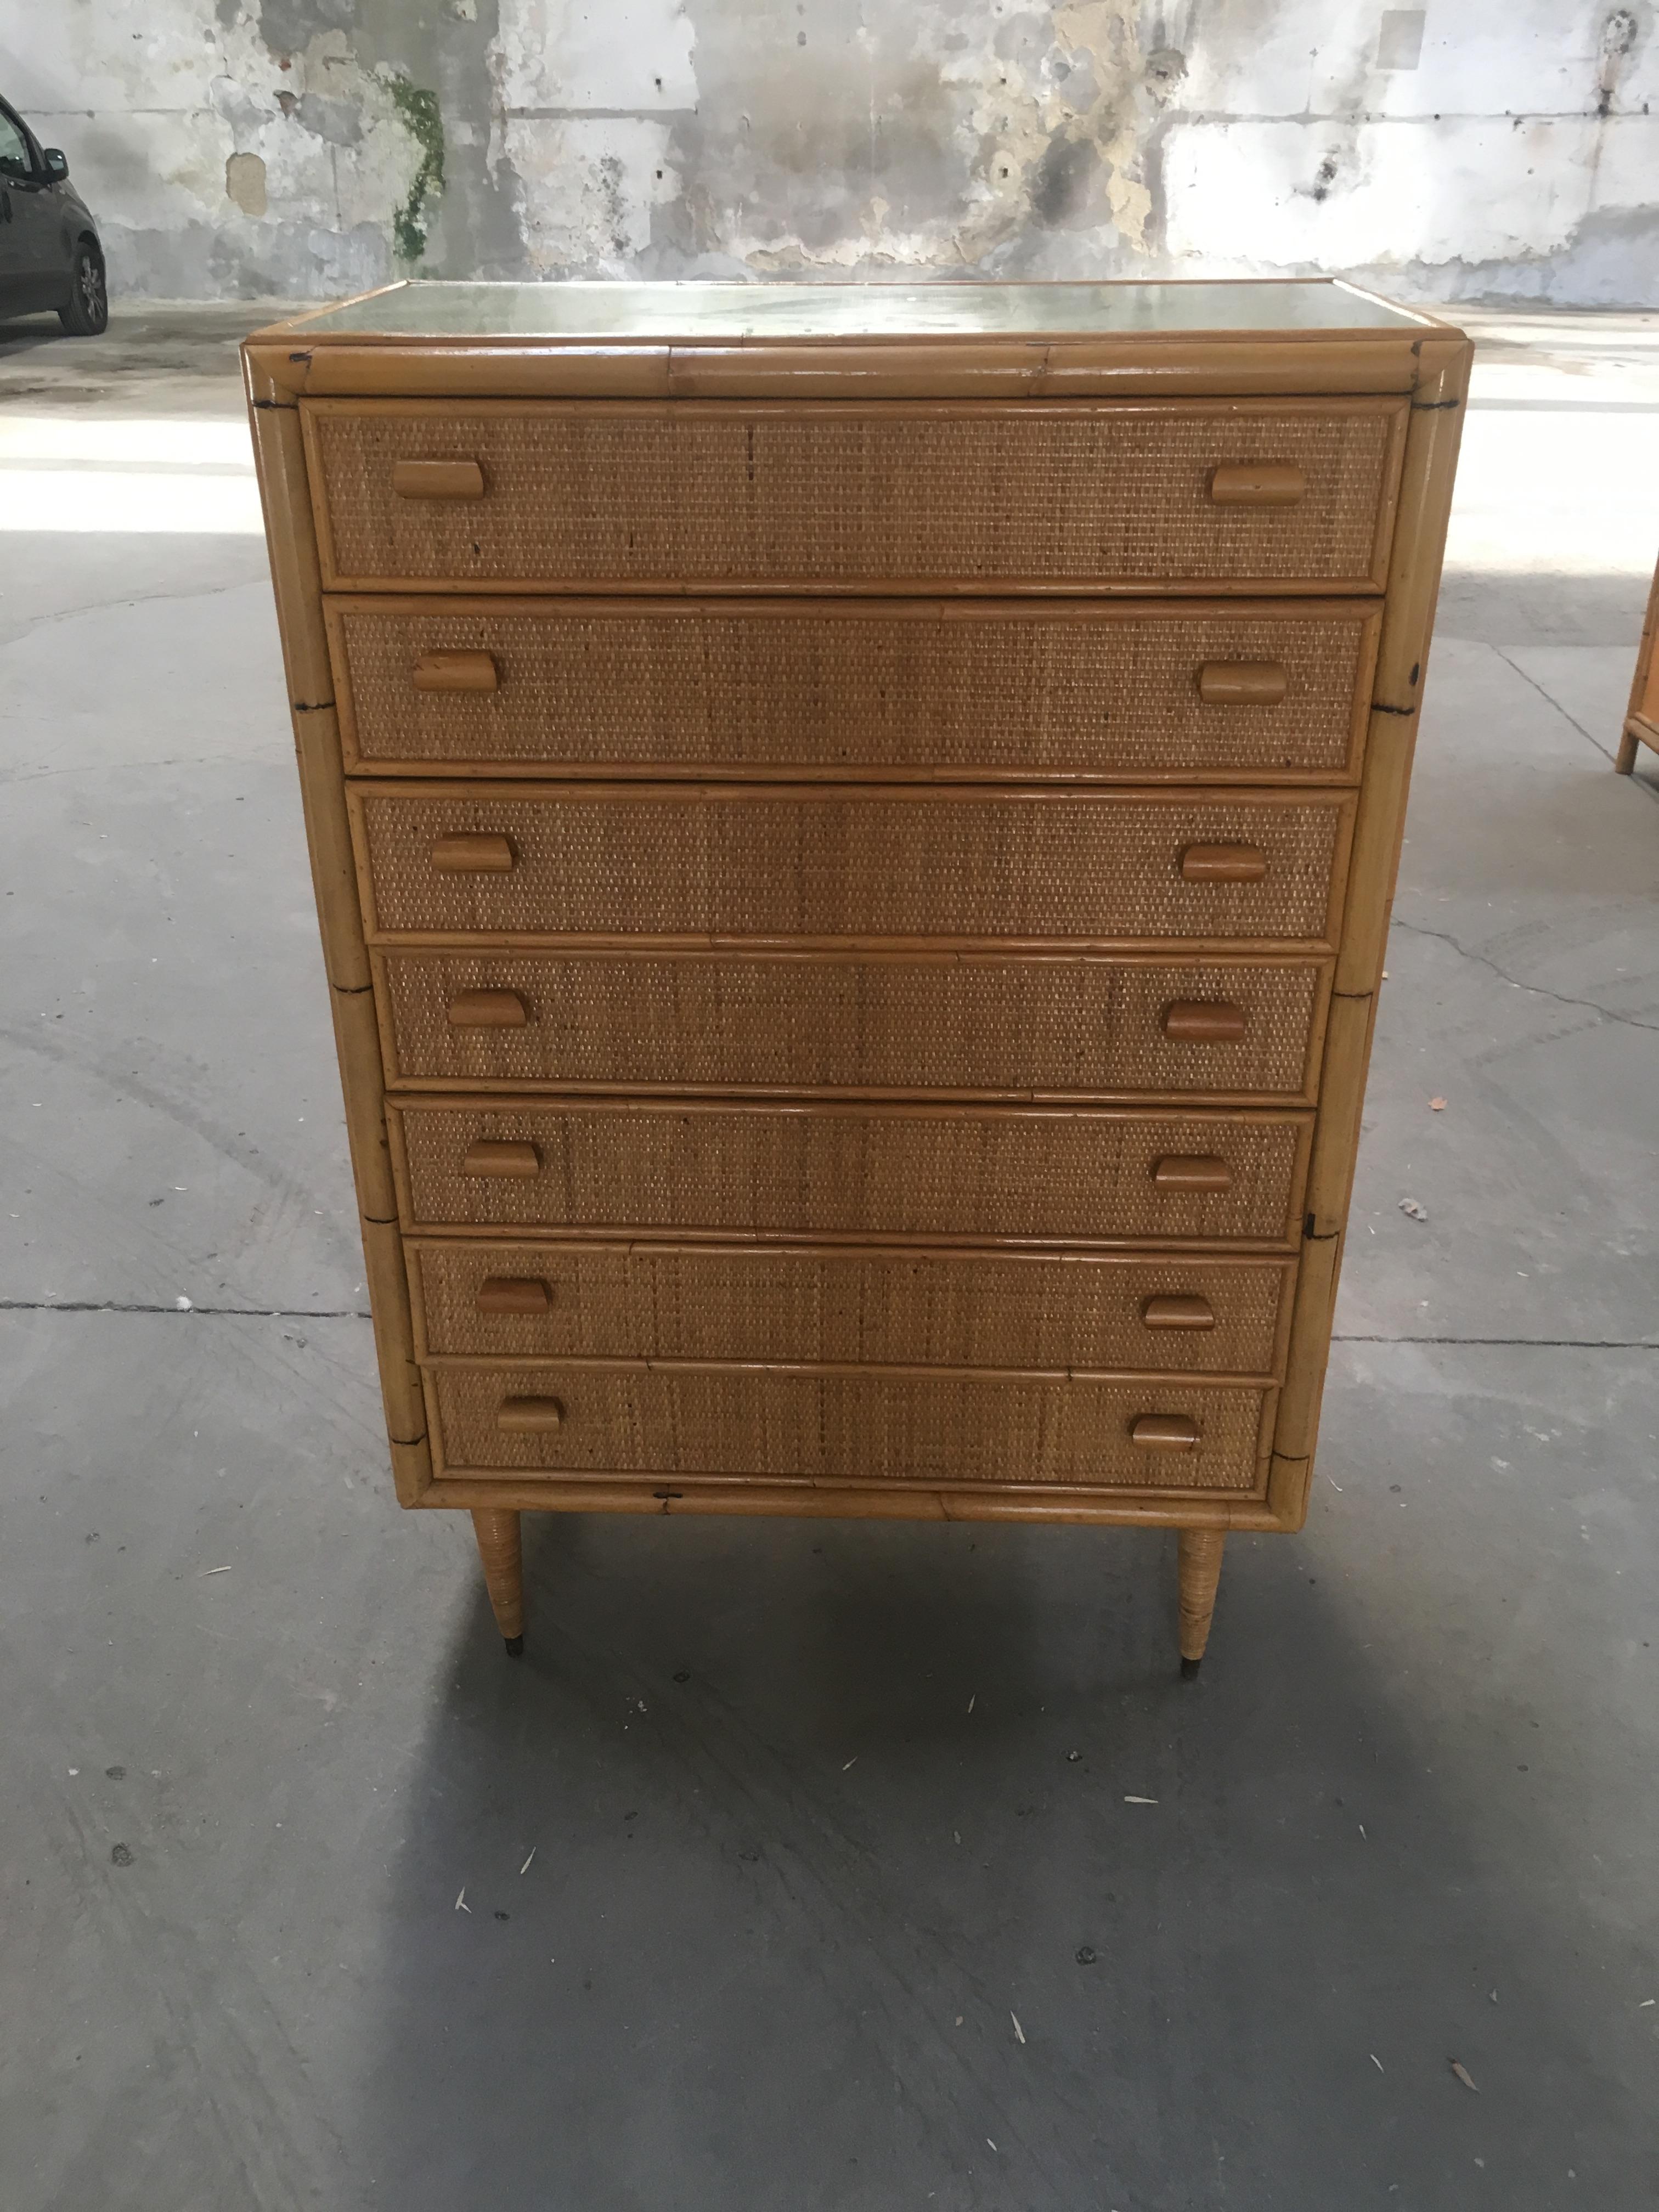 Mid-Century Modern Italian bamboo dresser with 7 drawers and glass top from 1970s.